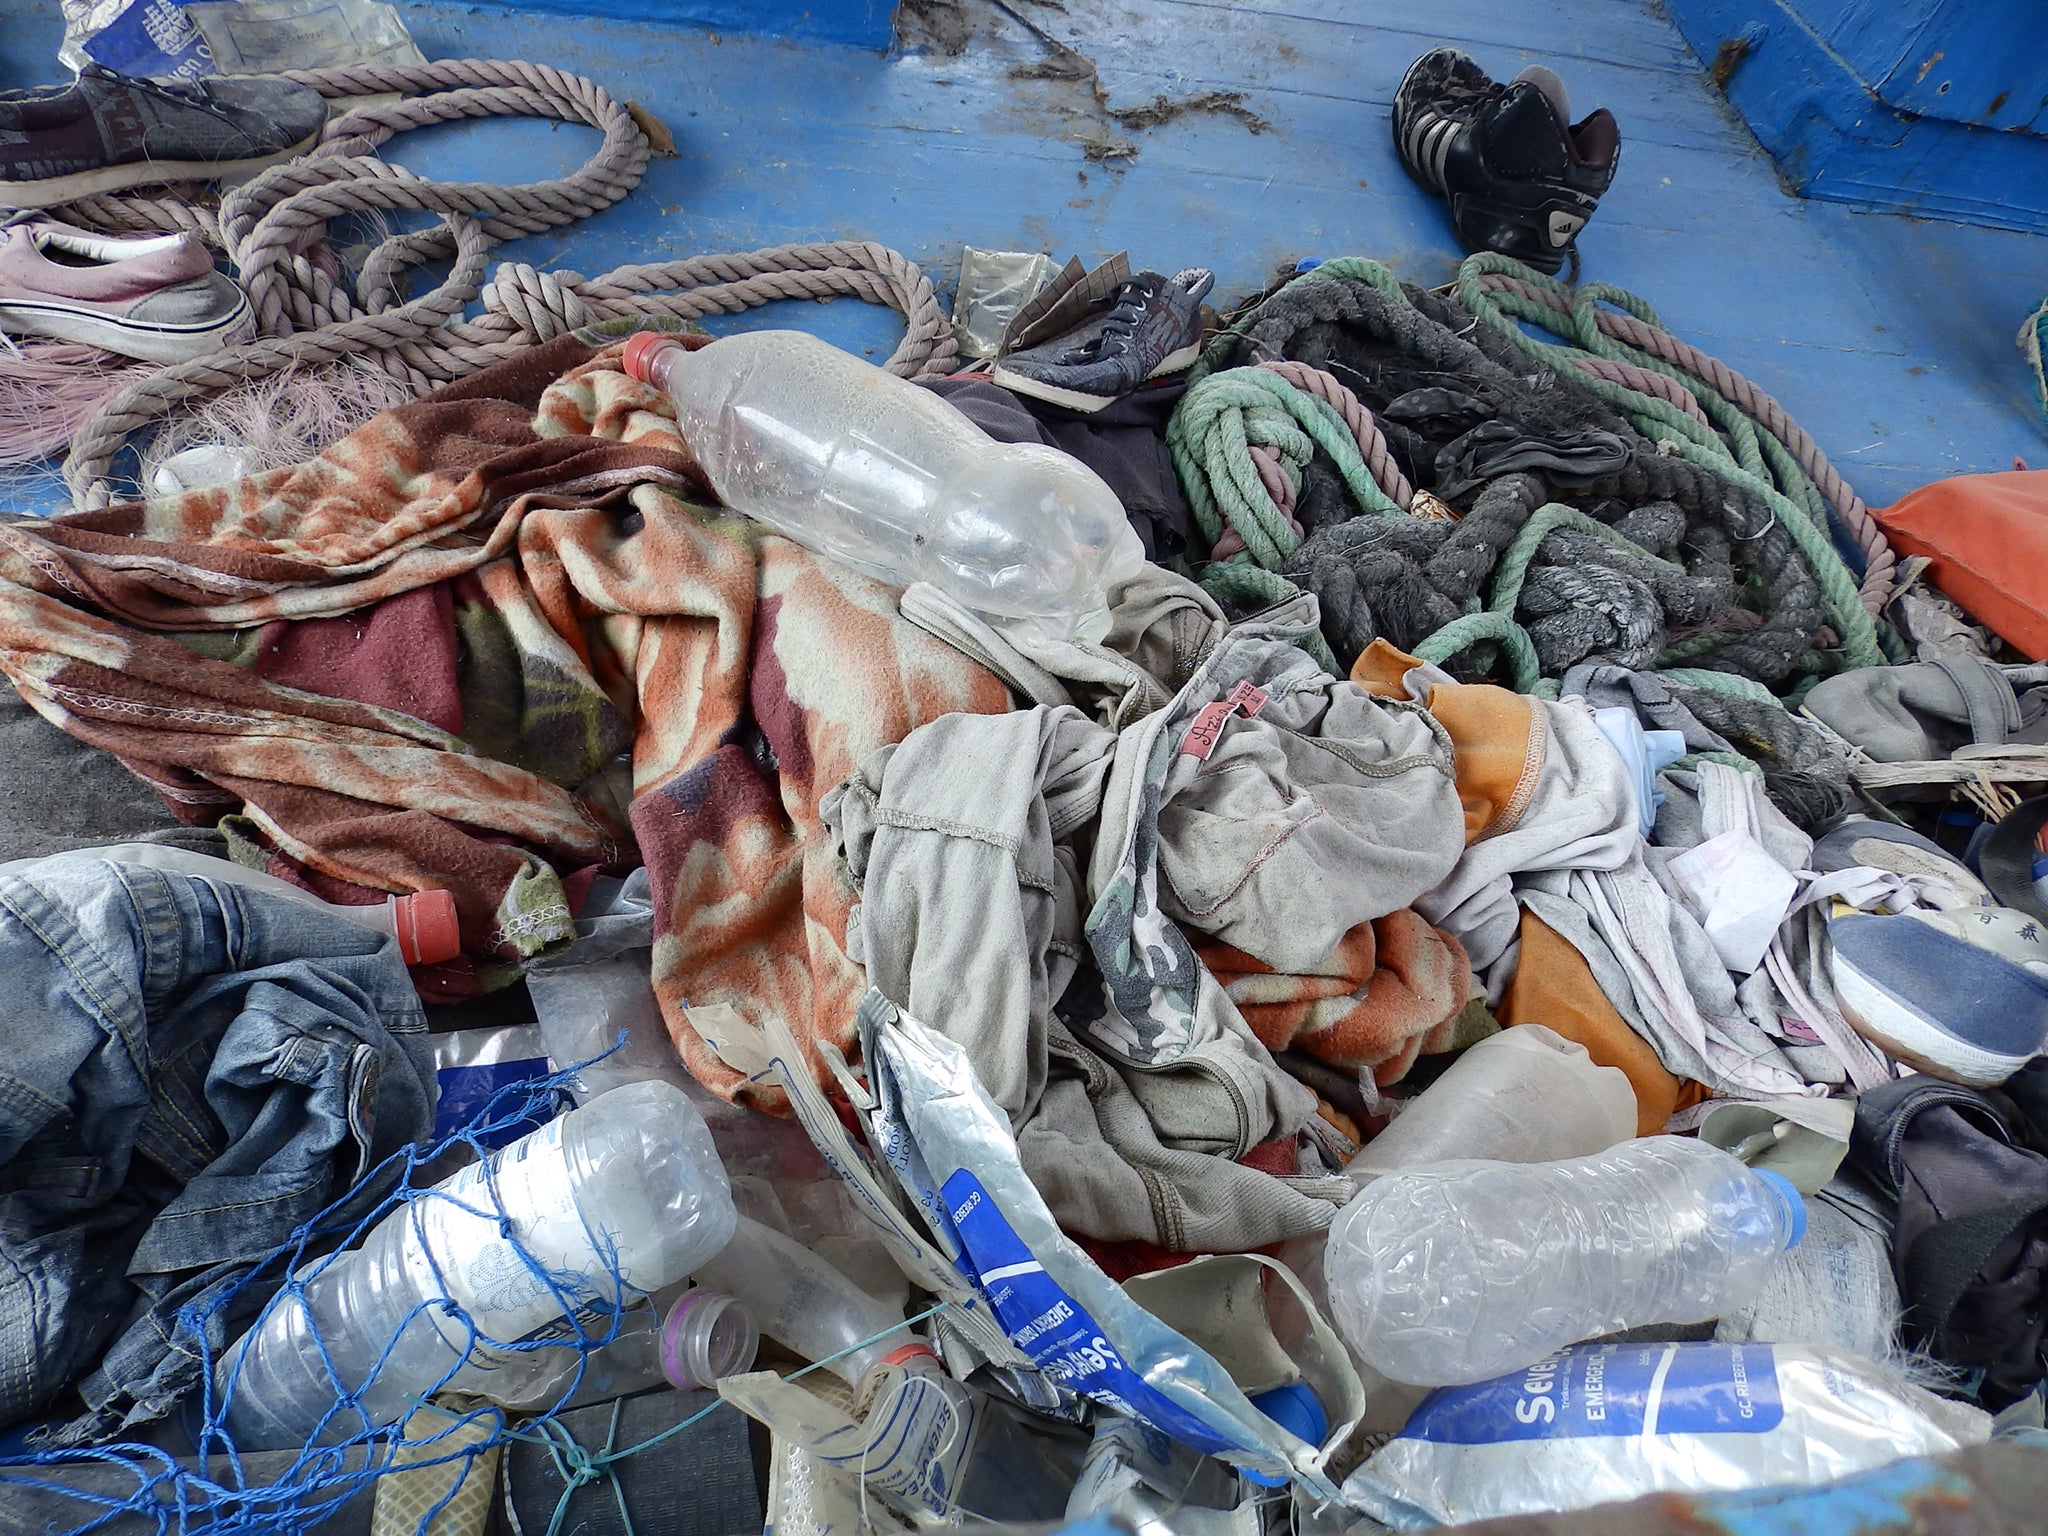 Belongings of migrants left on the former migrant boats